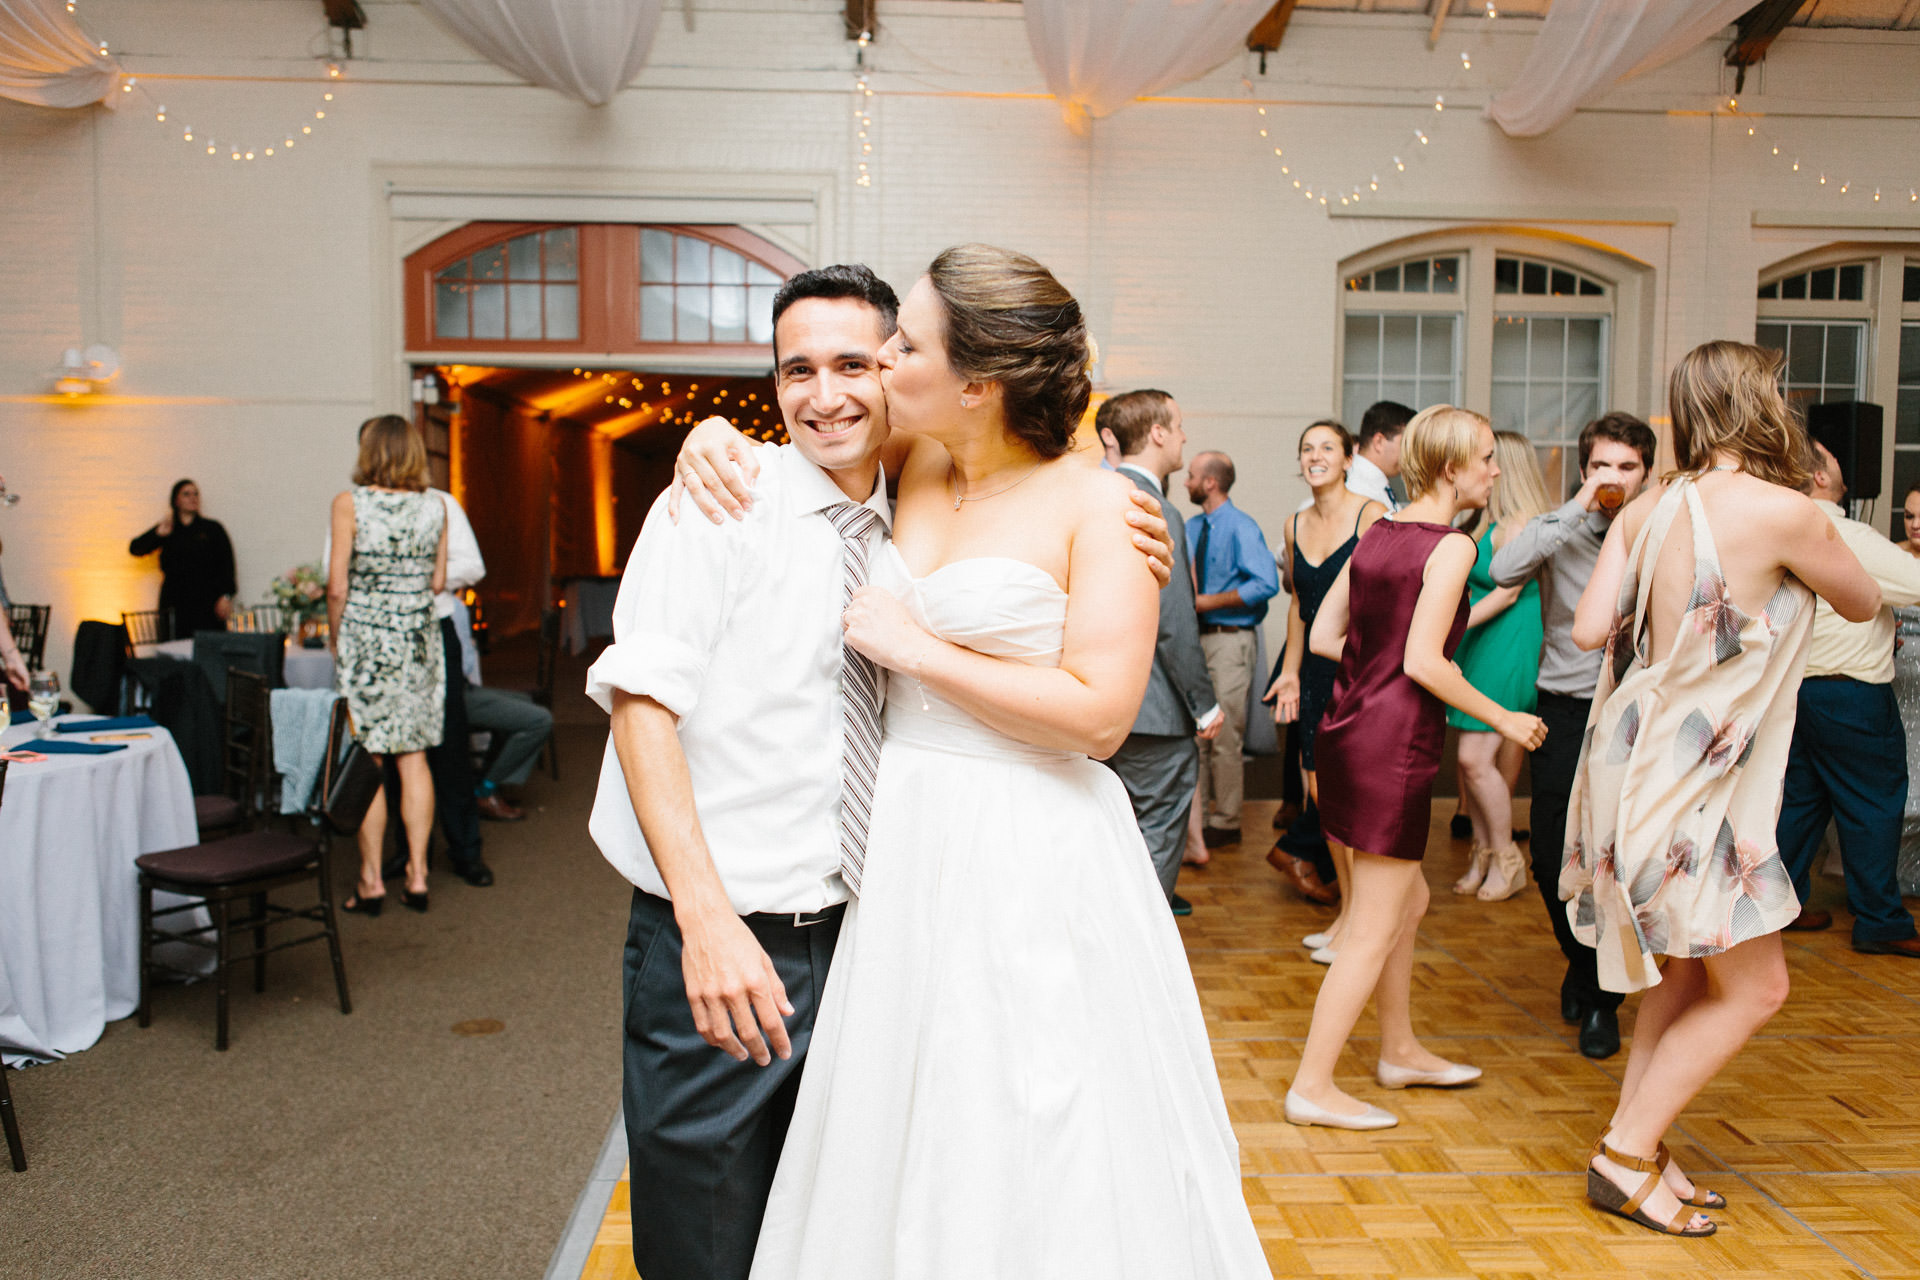 Bride kissing her brother while guests dance around them